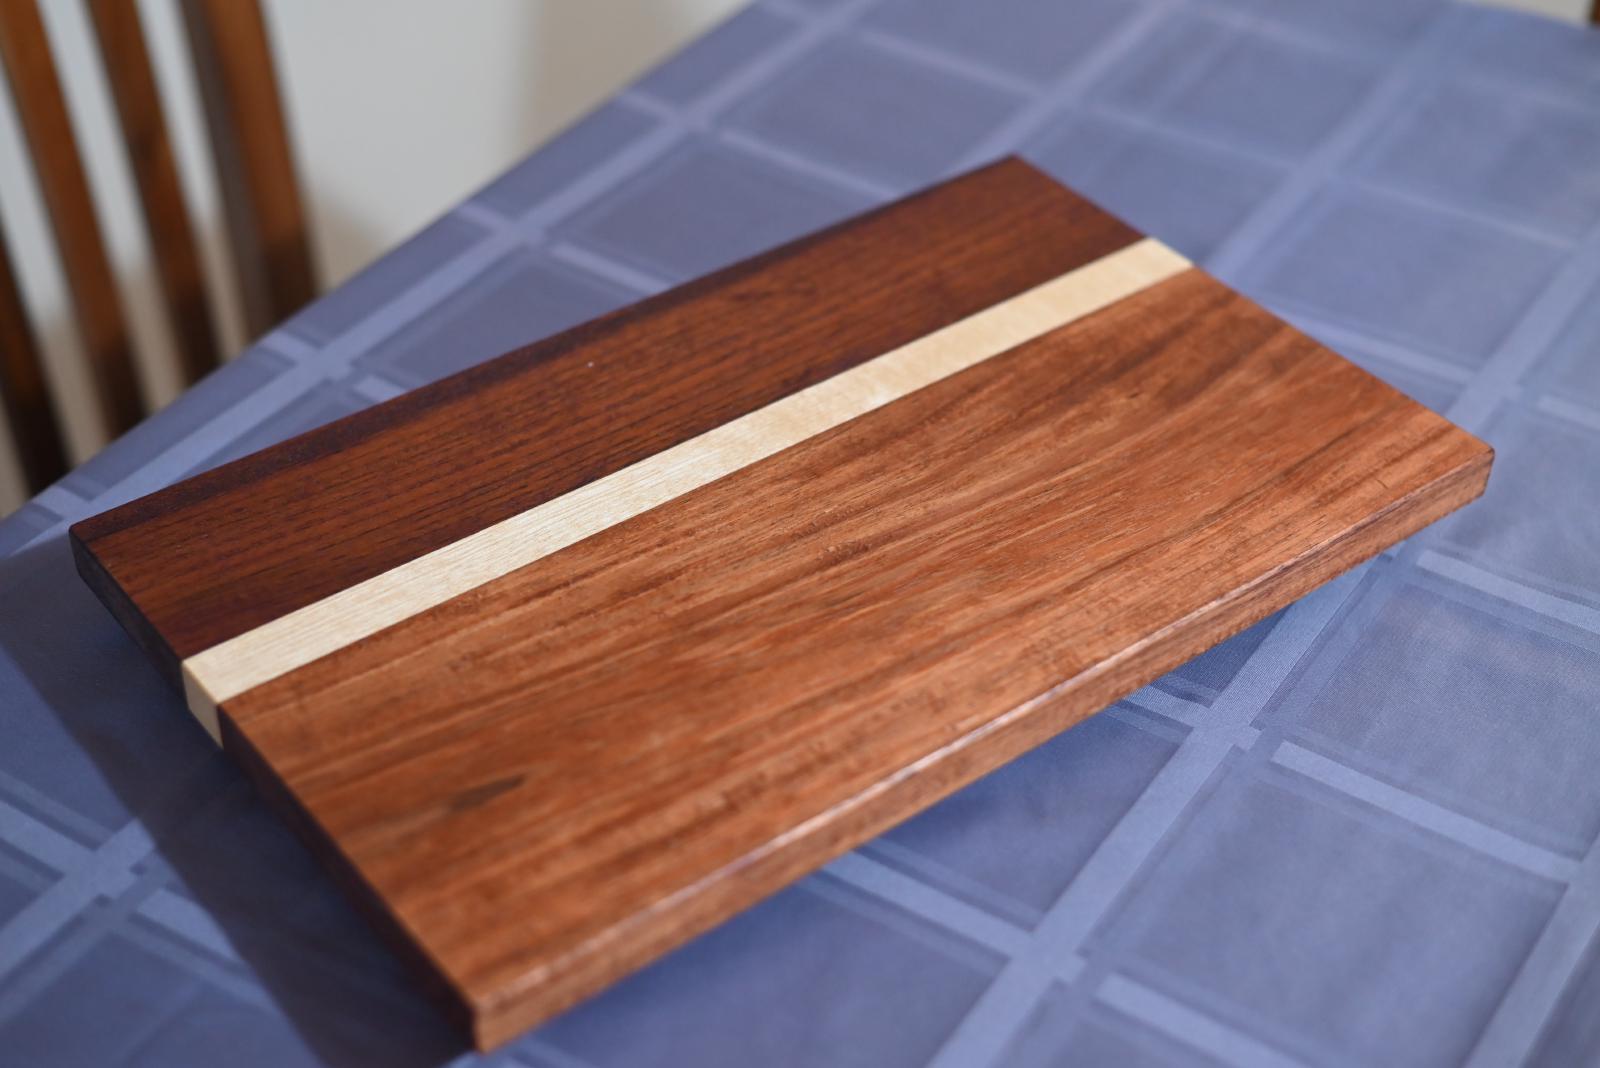 2021 - Serving board - Blackwood, Silver Ash and Red Cedar (collab with my daughter)